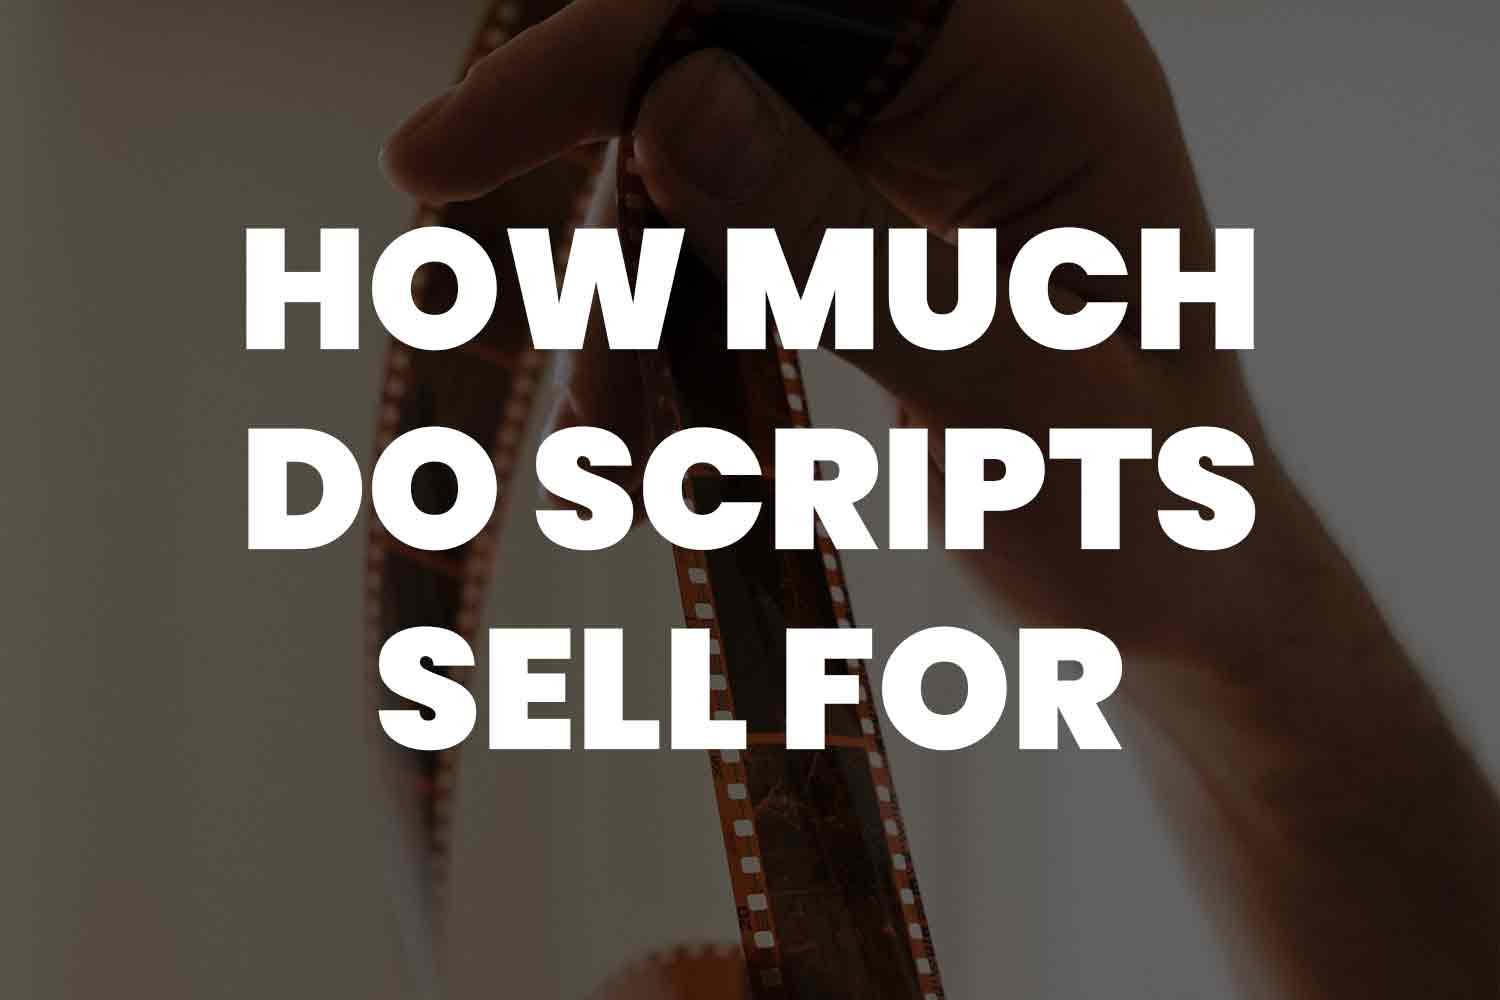 How much do scripts sell for